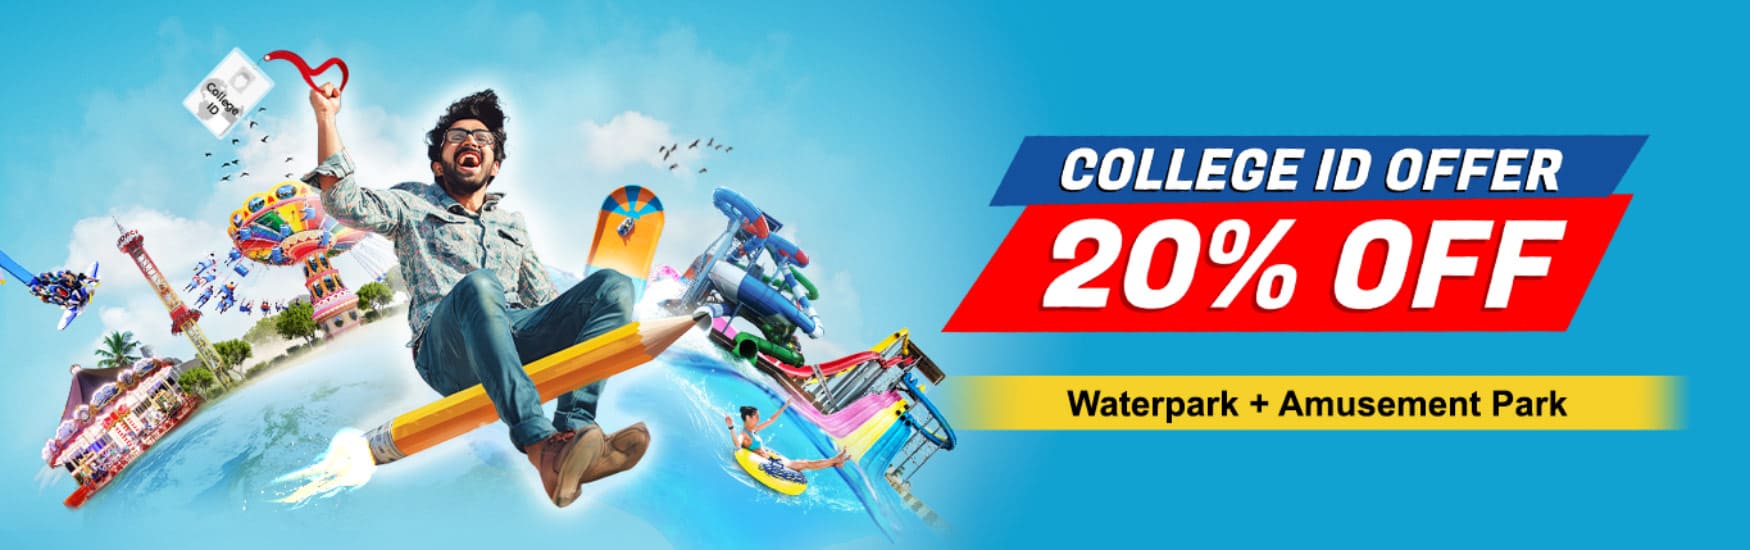 Discounted summer water & amusement park entry with valid college ID at Wet N Joy Lonavala.